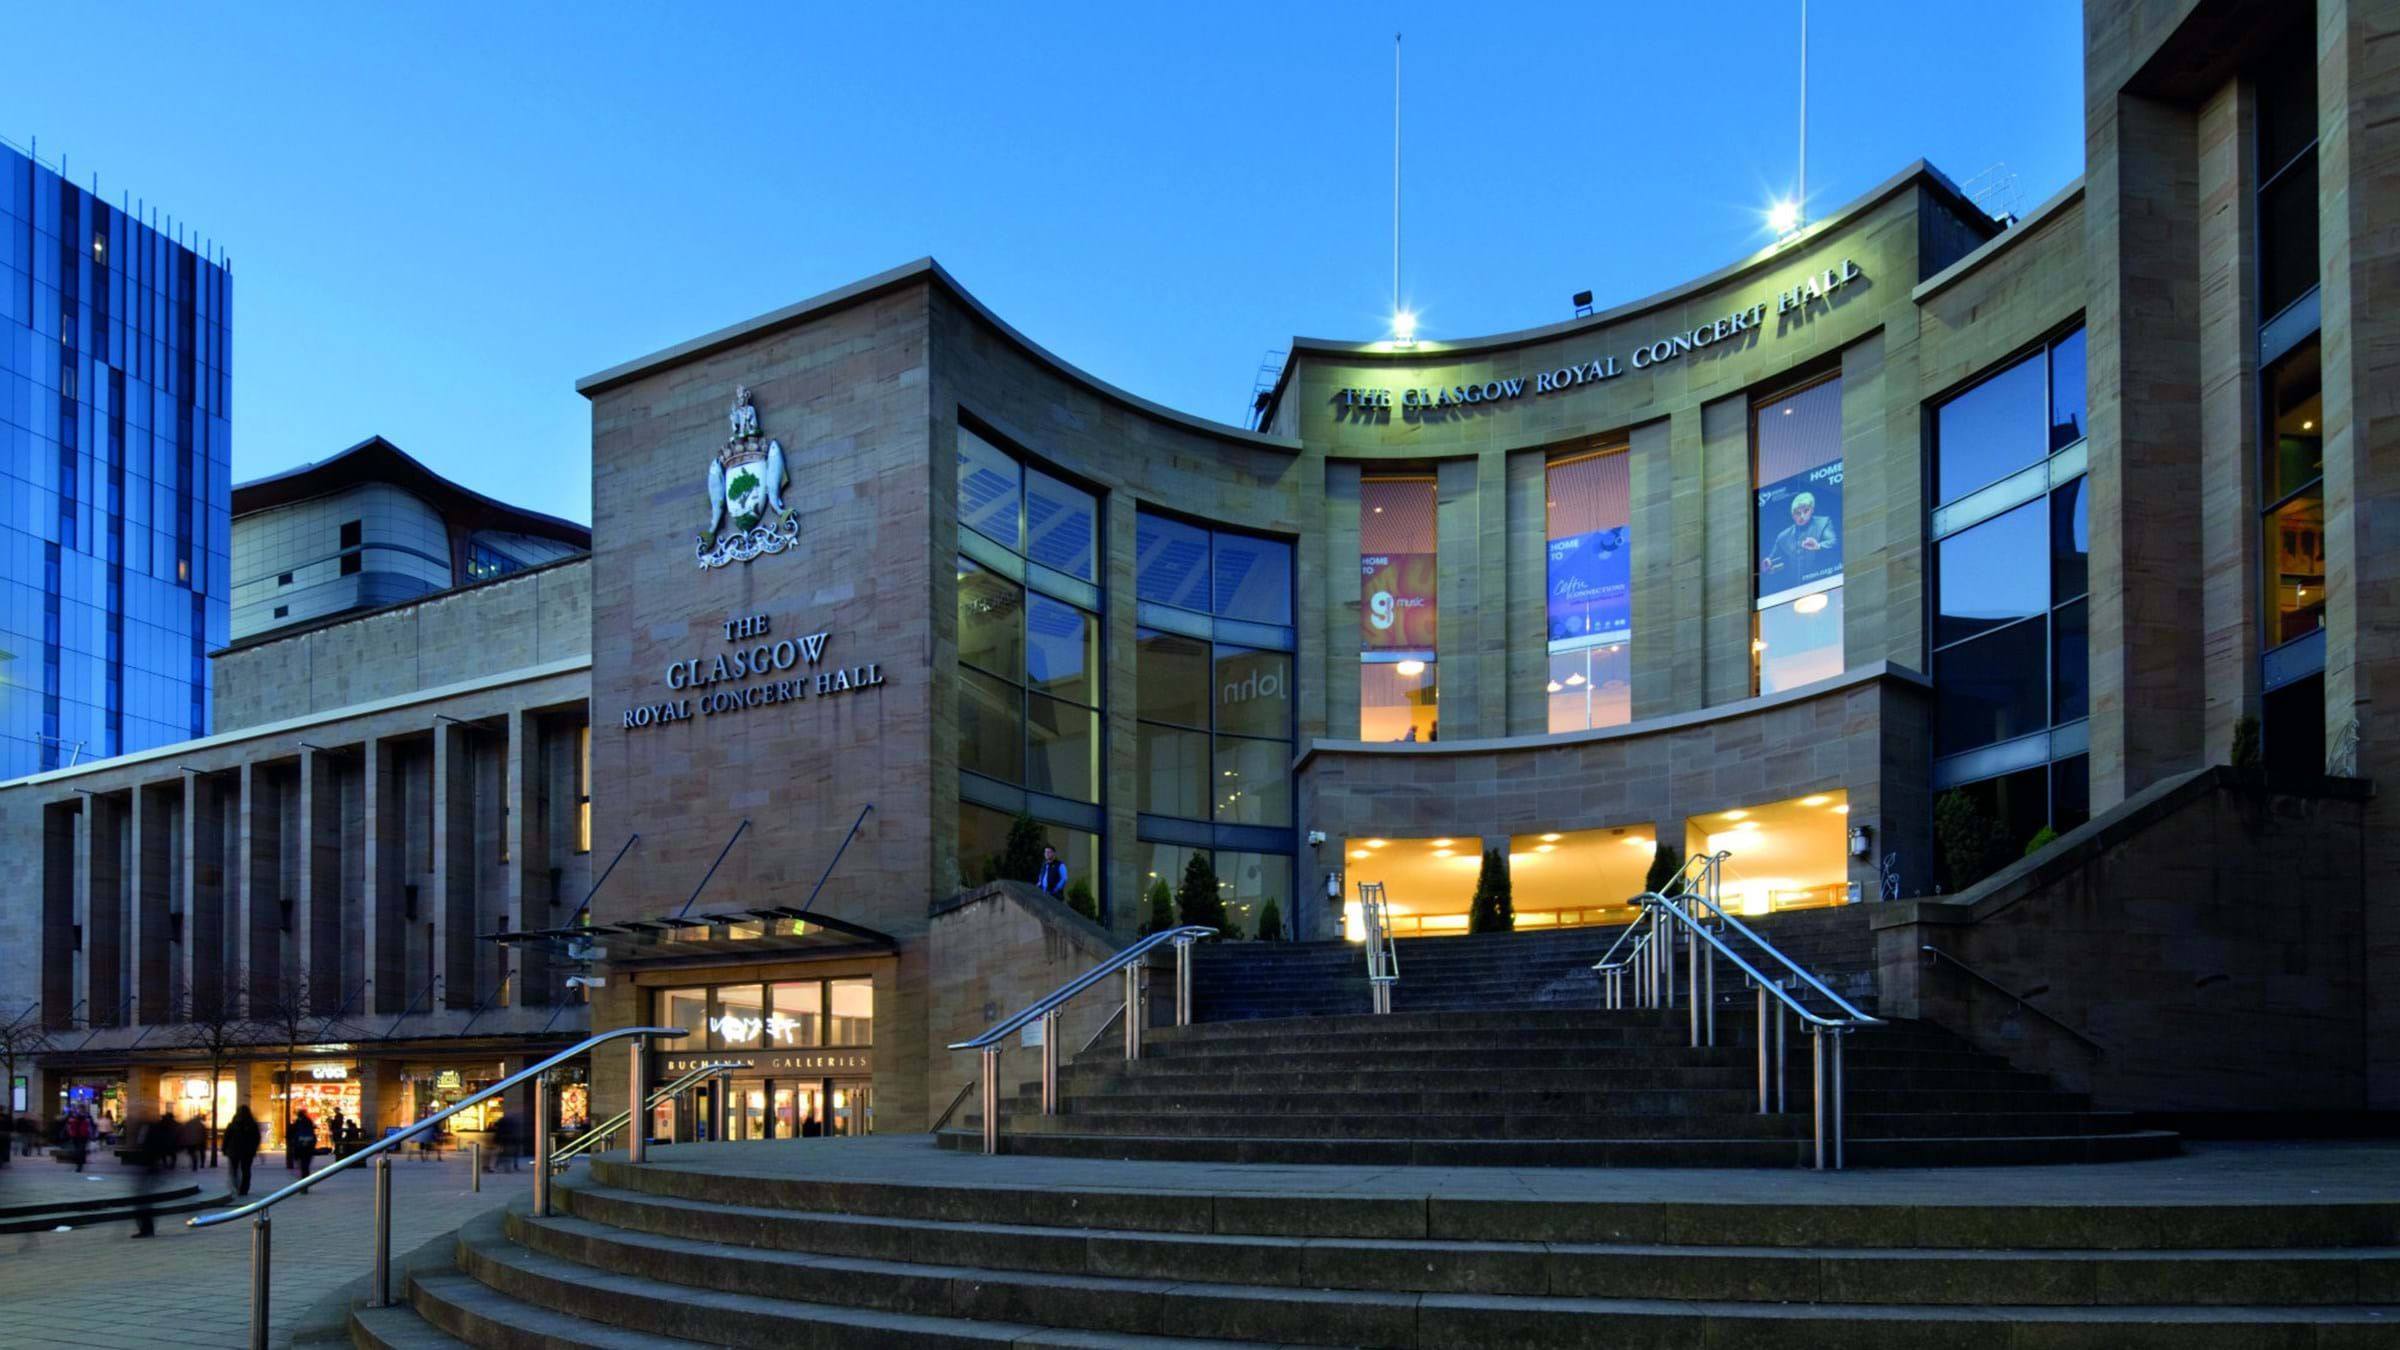 13 Astounding Facts About Glasgow Royal Concert Hall - Facts.net